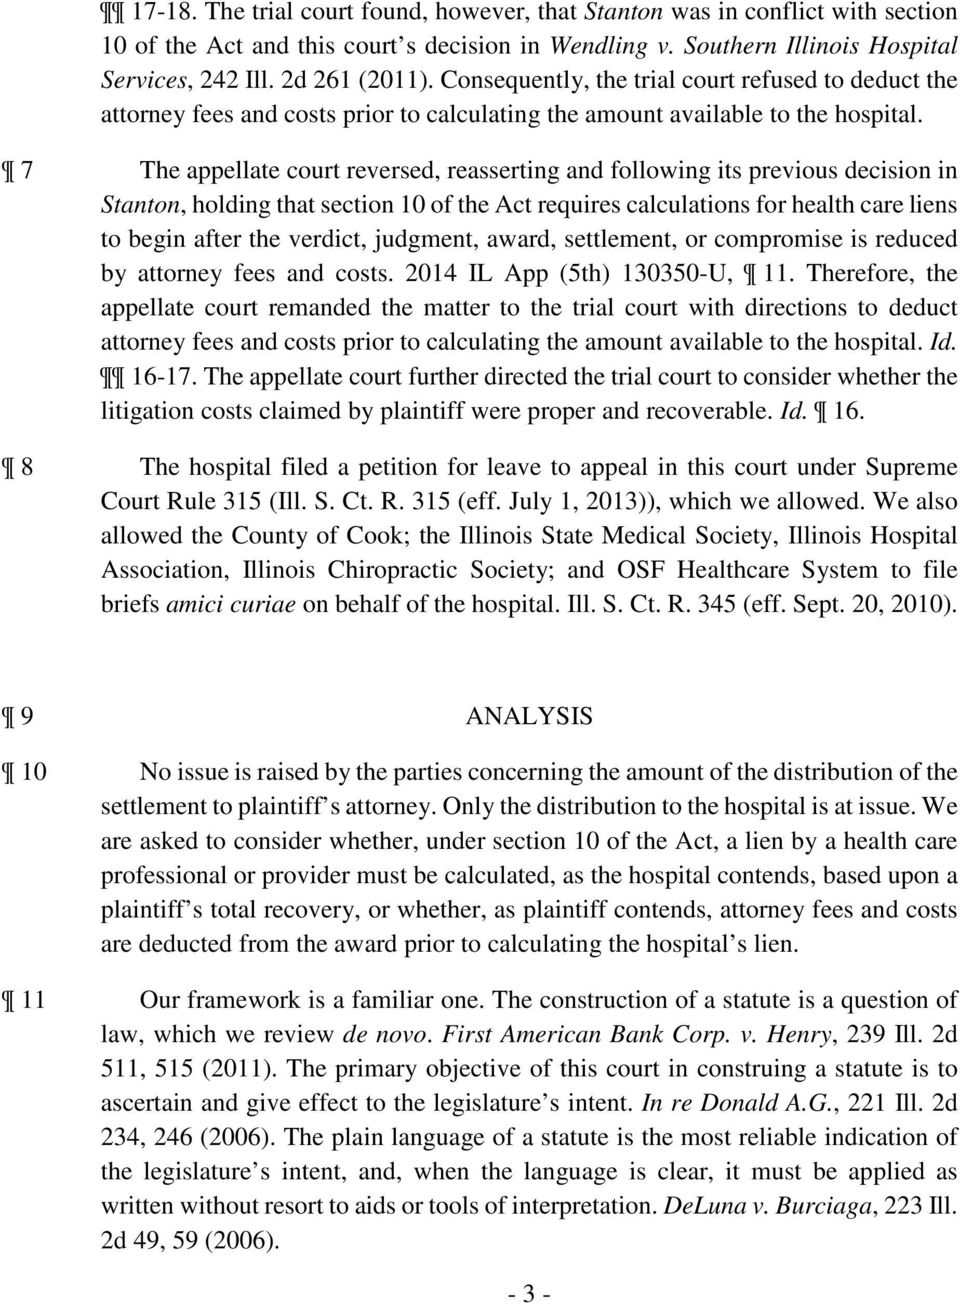 7 The appellate court reversed, reasserting and following its previous decision in Stanton, holding that section 10 of the Act requires calculations for health care liens to begin after the verdict,